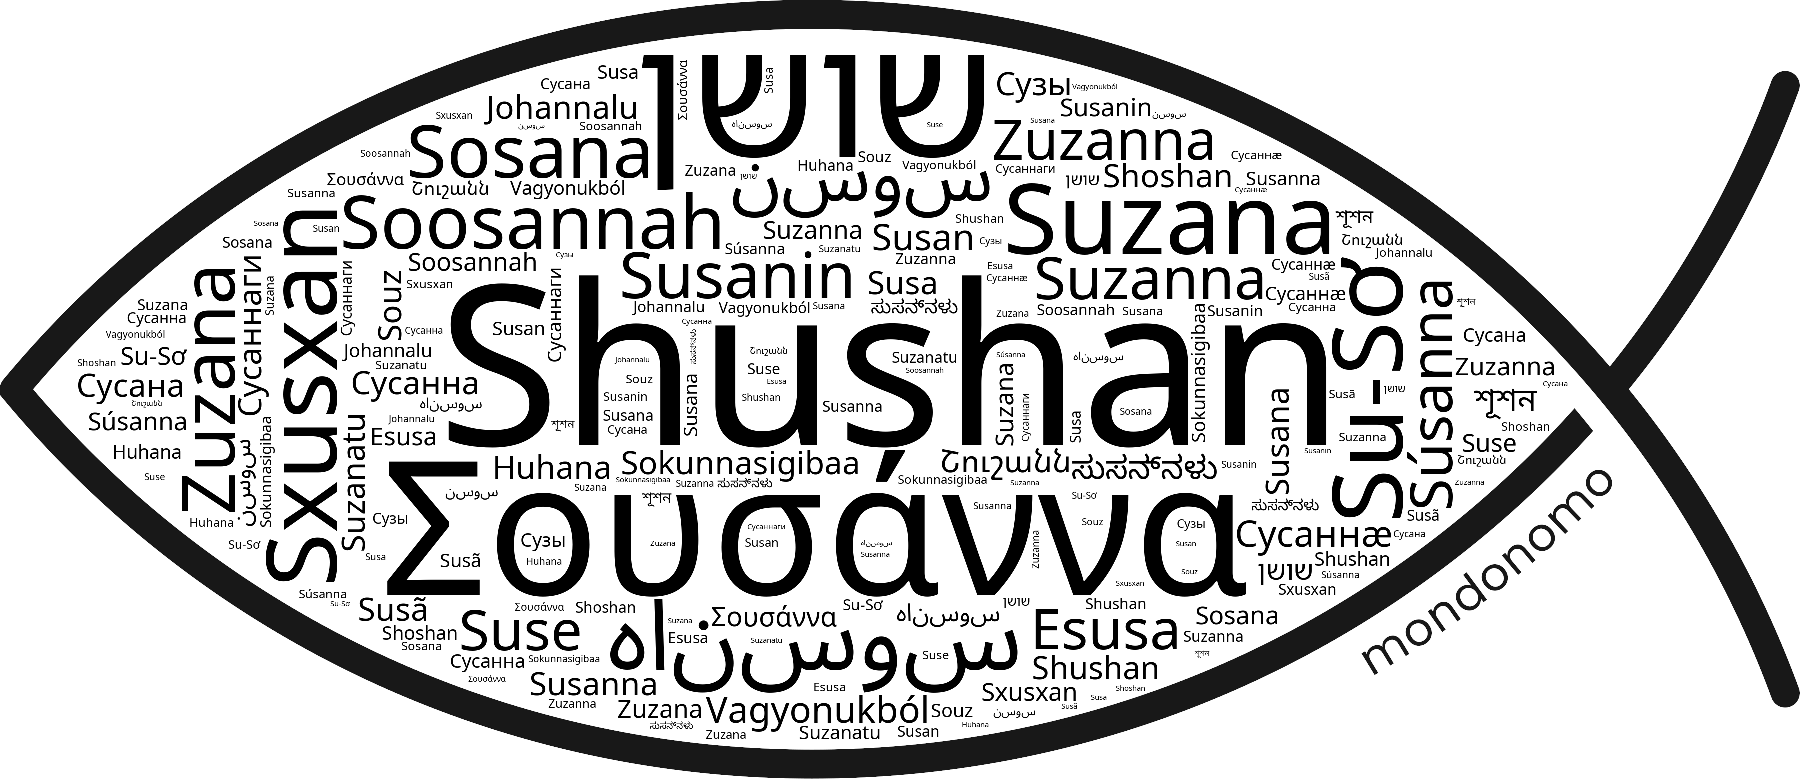 Name Shushan in the world's Bibles